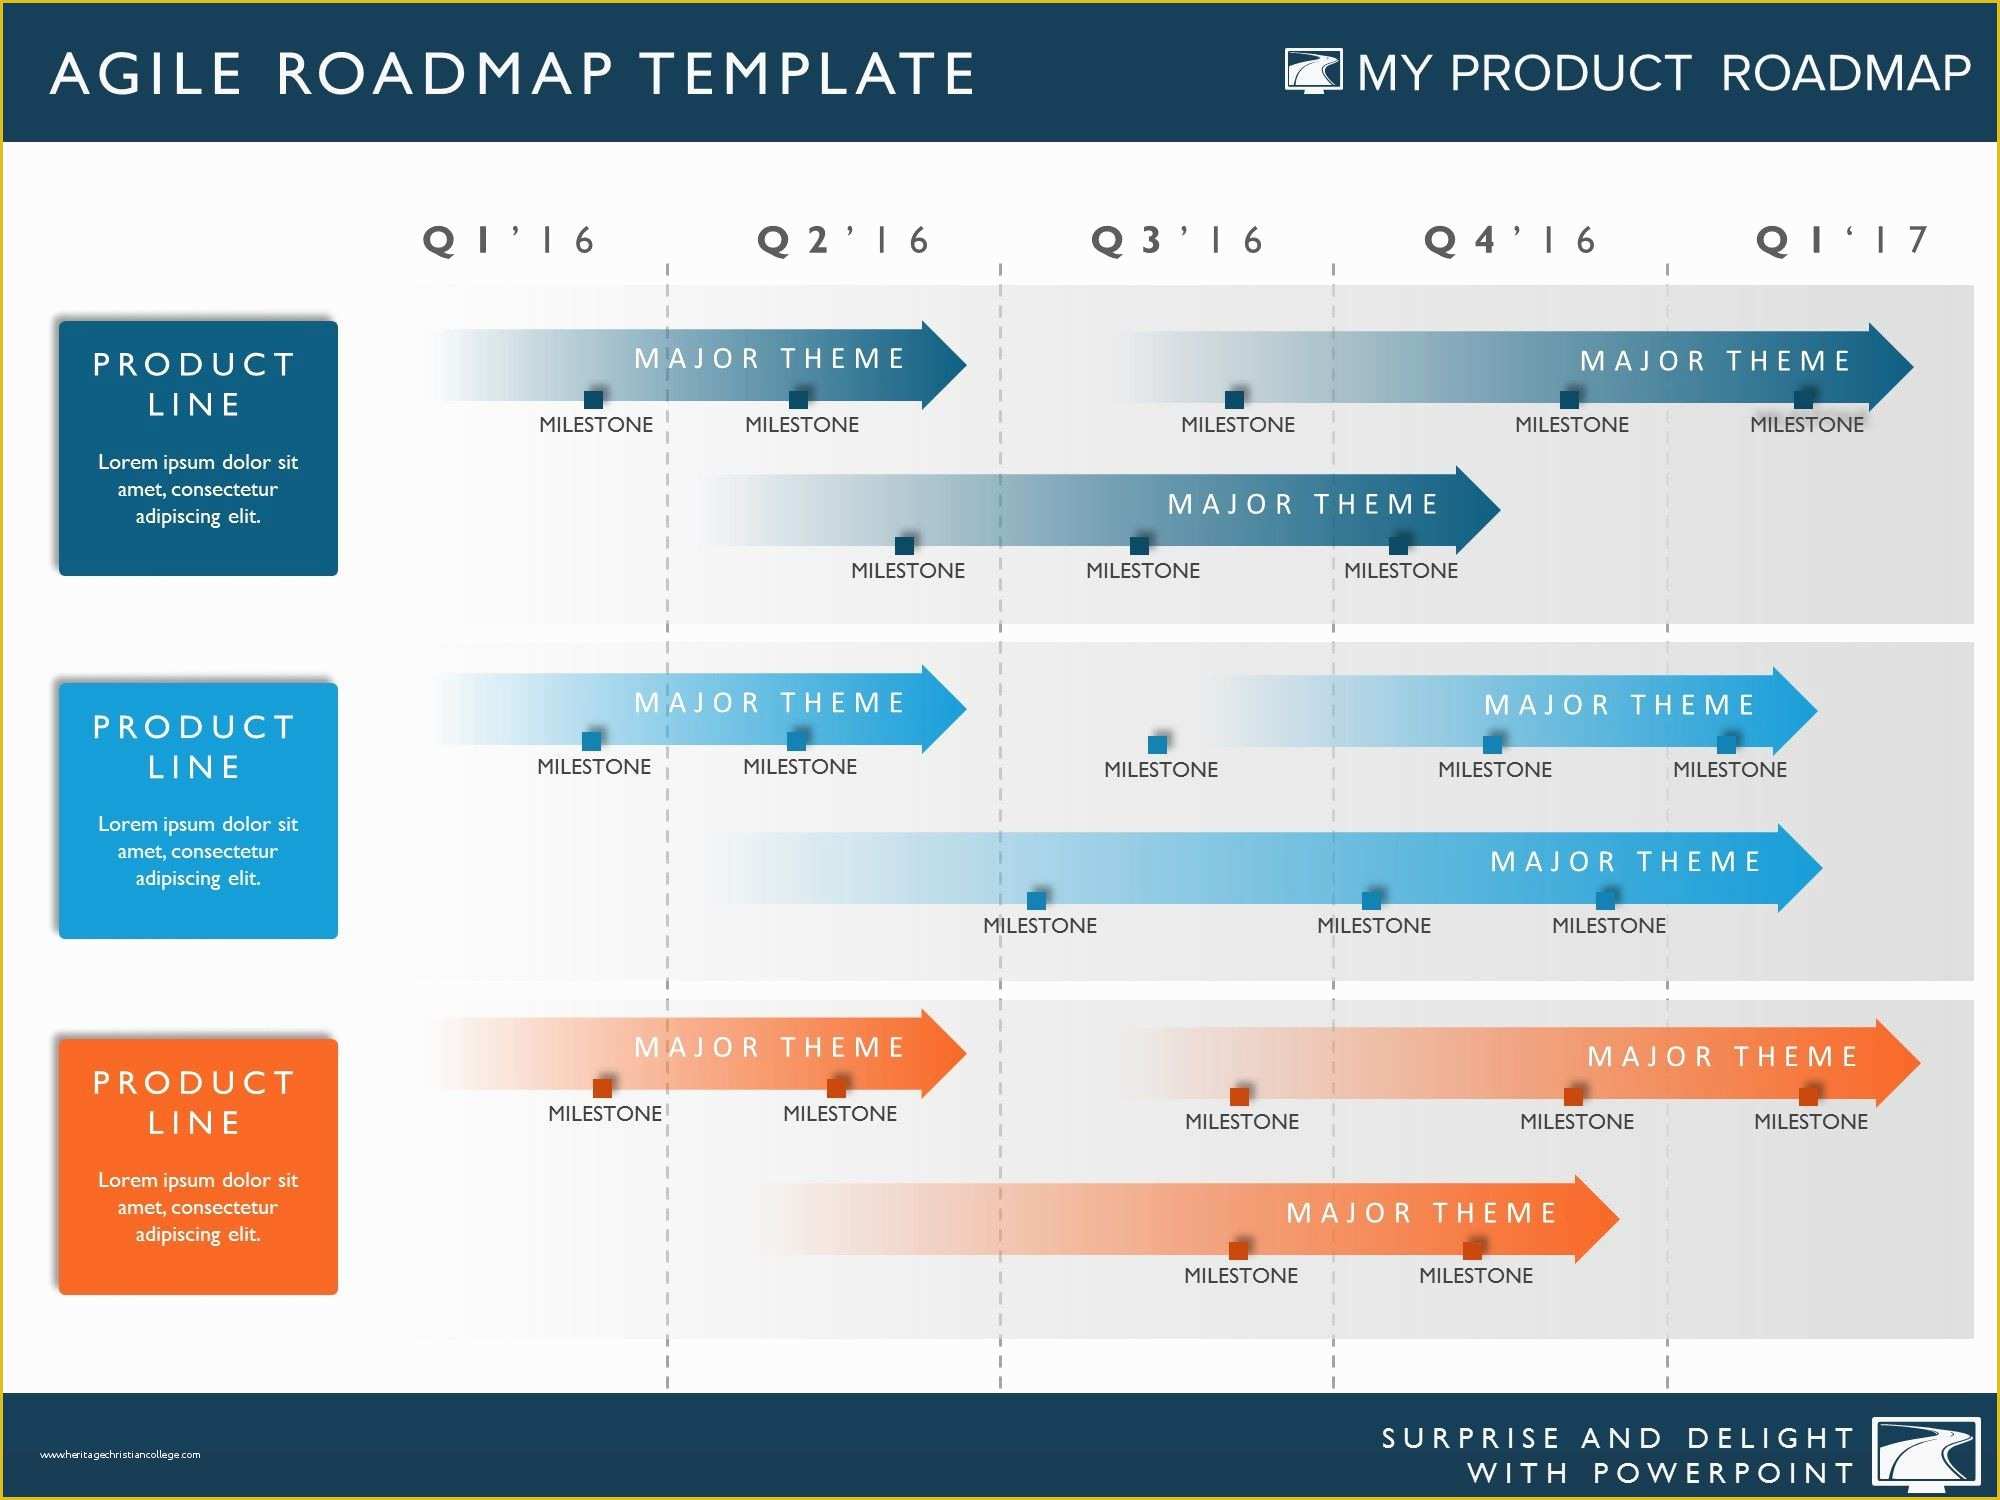 Free Roadmap Timeline Template Of Four Phase Agile Product Strategy Timeline Roadmapping